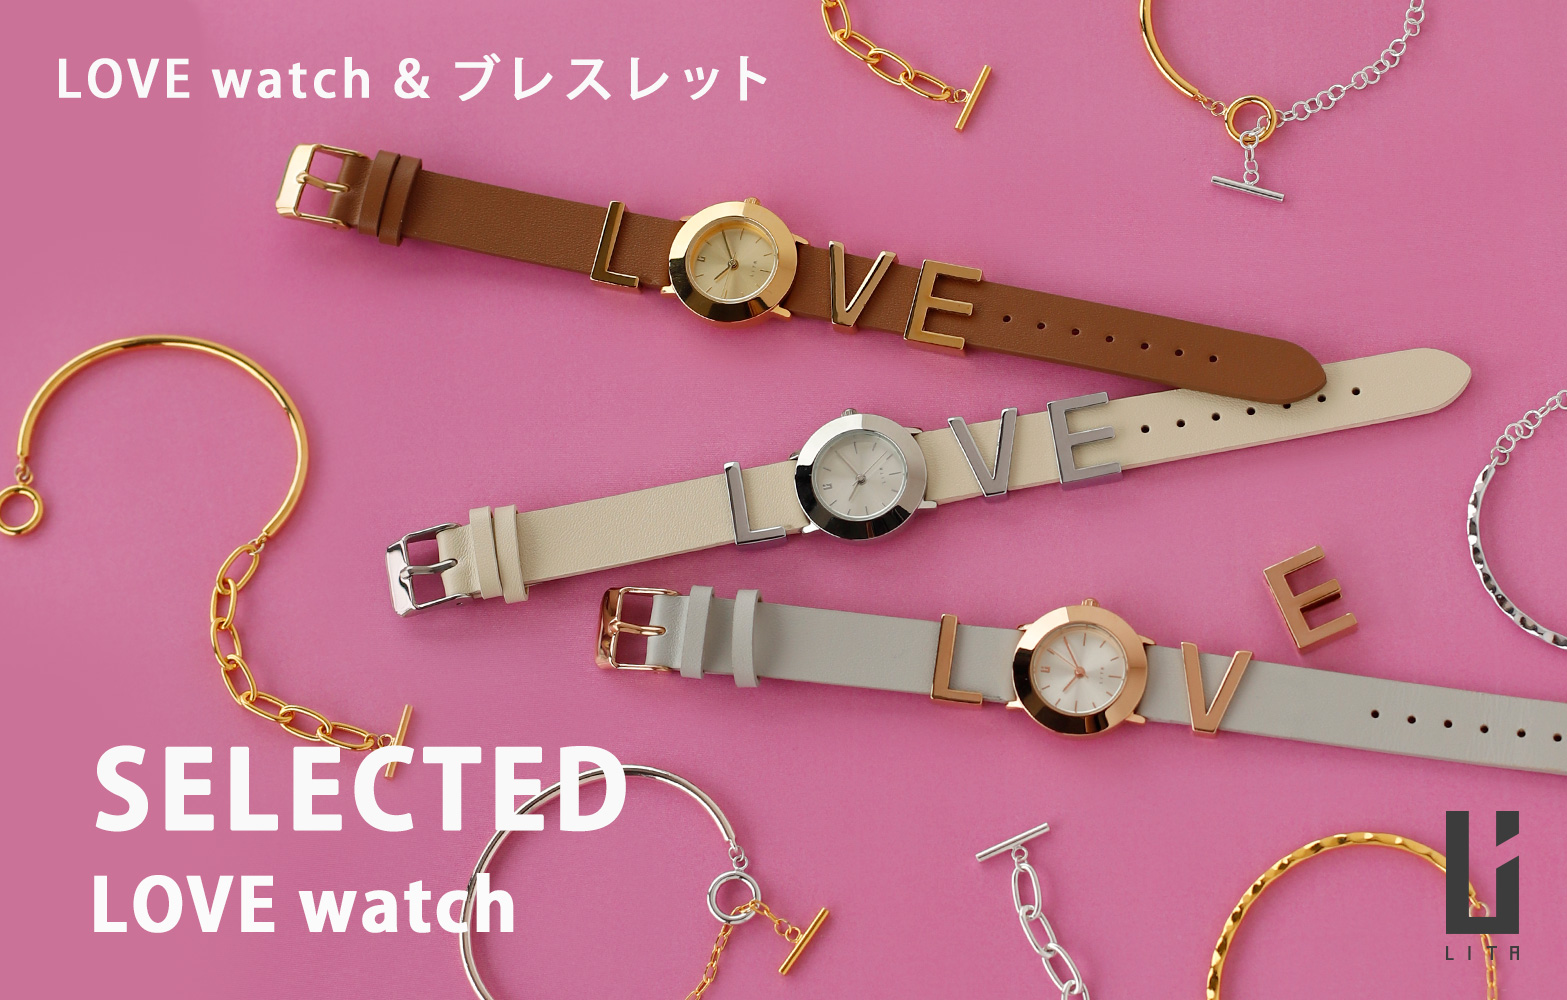 【LOVE watch＆ブレスレット】SELECTED LOVE watch